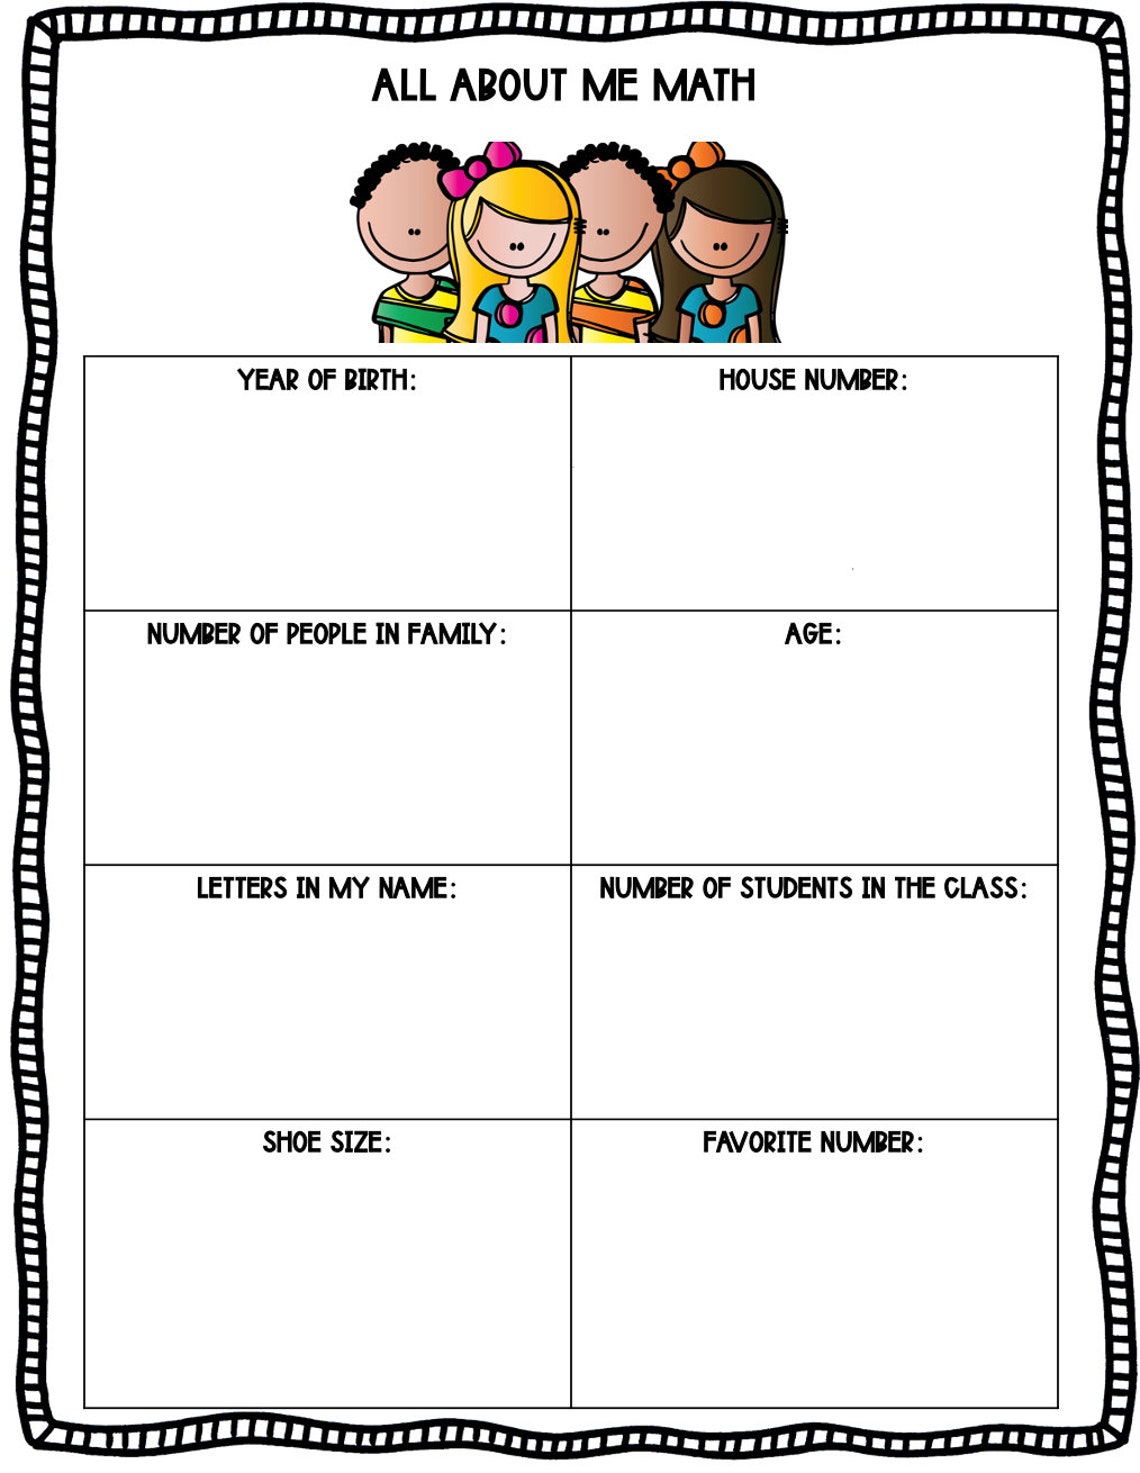 all-about-me-math-figure-me-out-math-printable-activity-download-now